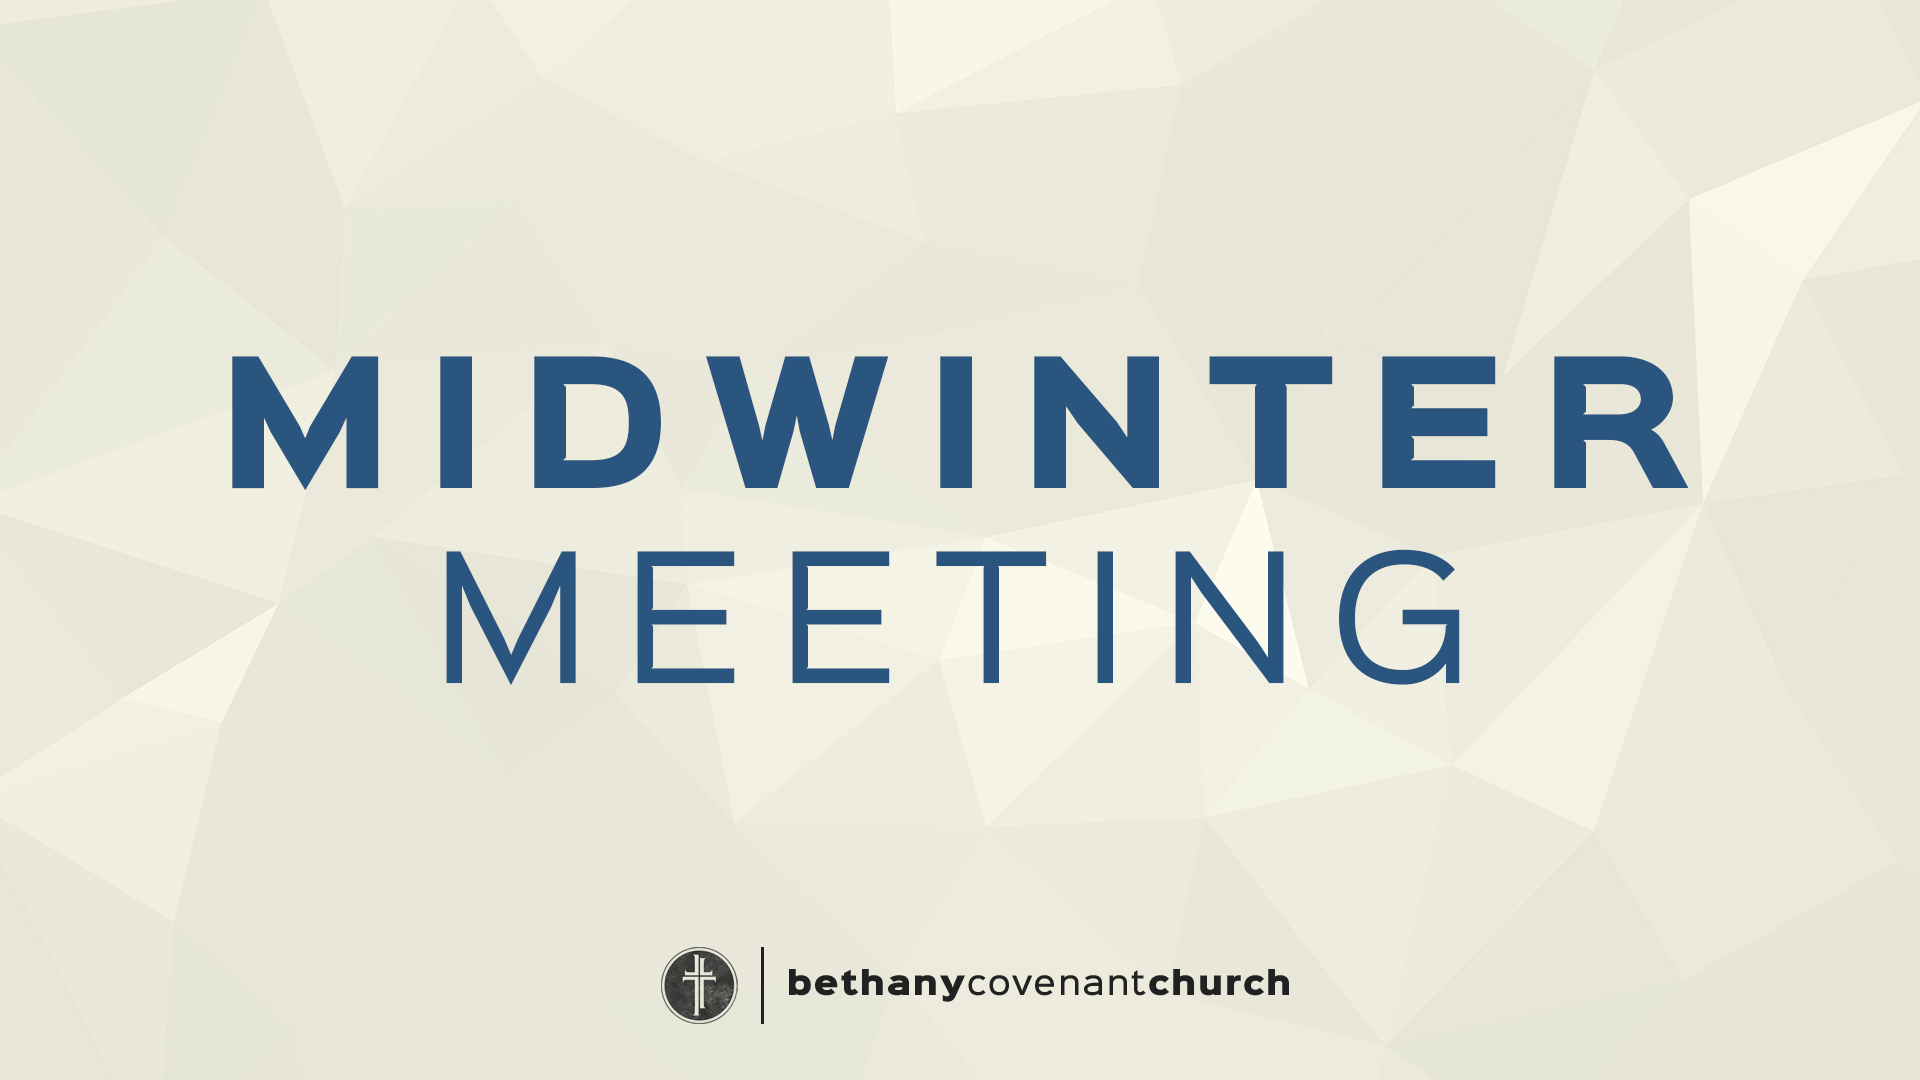 Congregational Midwinter Meeting Bethany Covenant Church